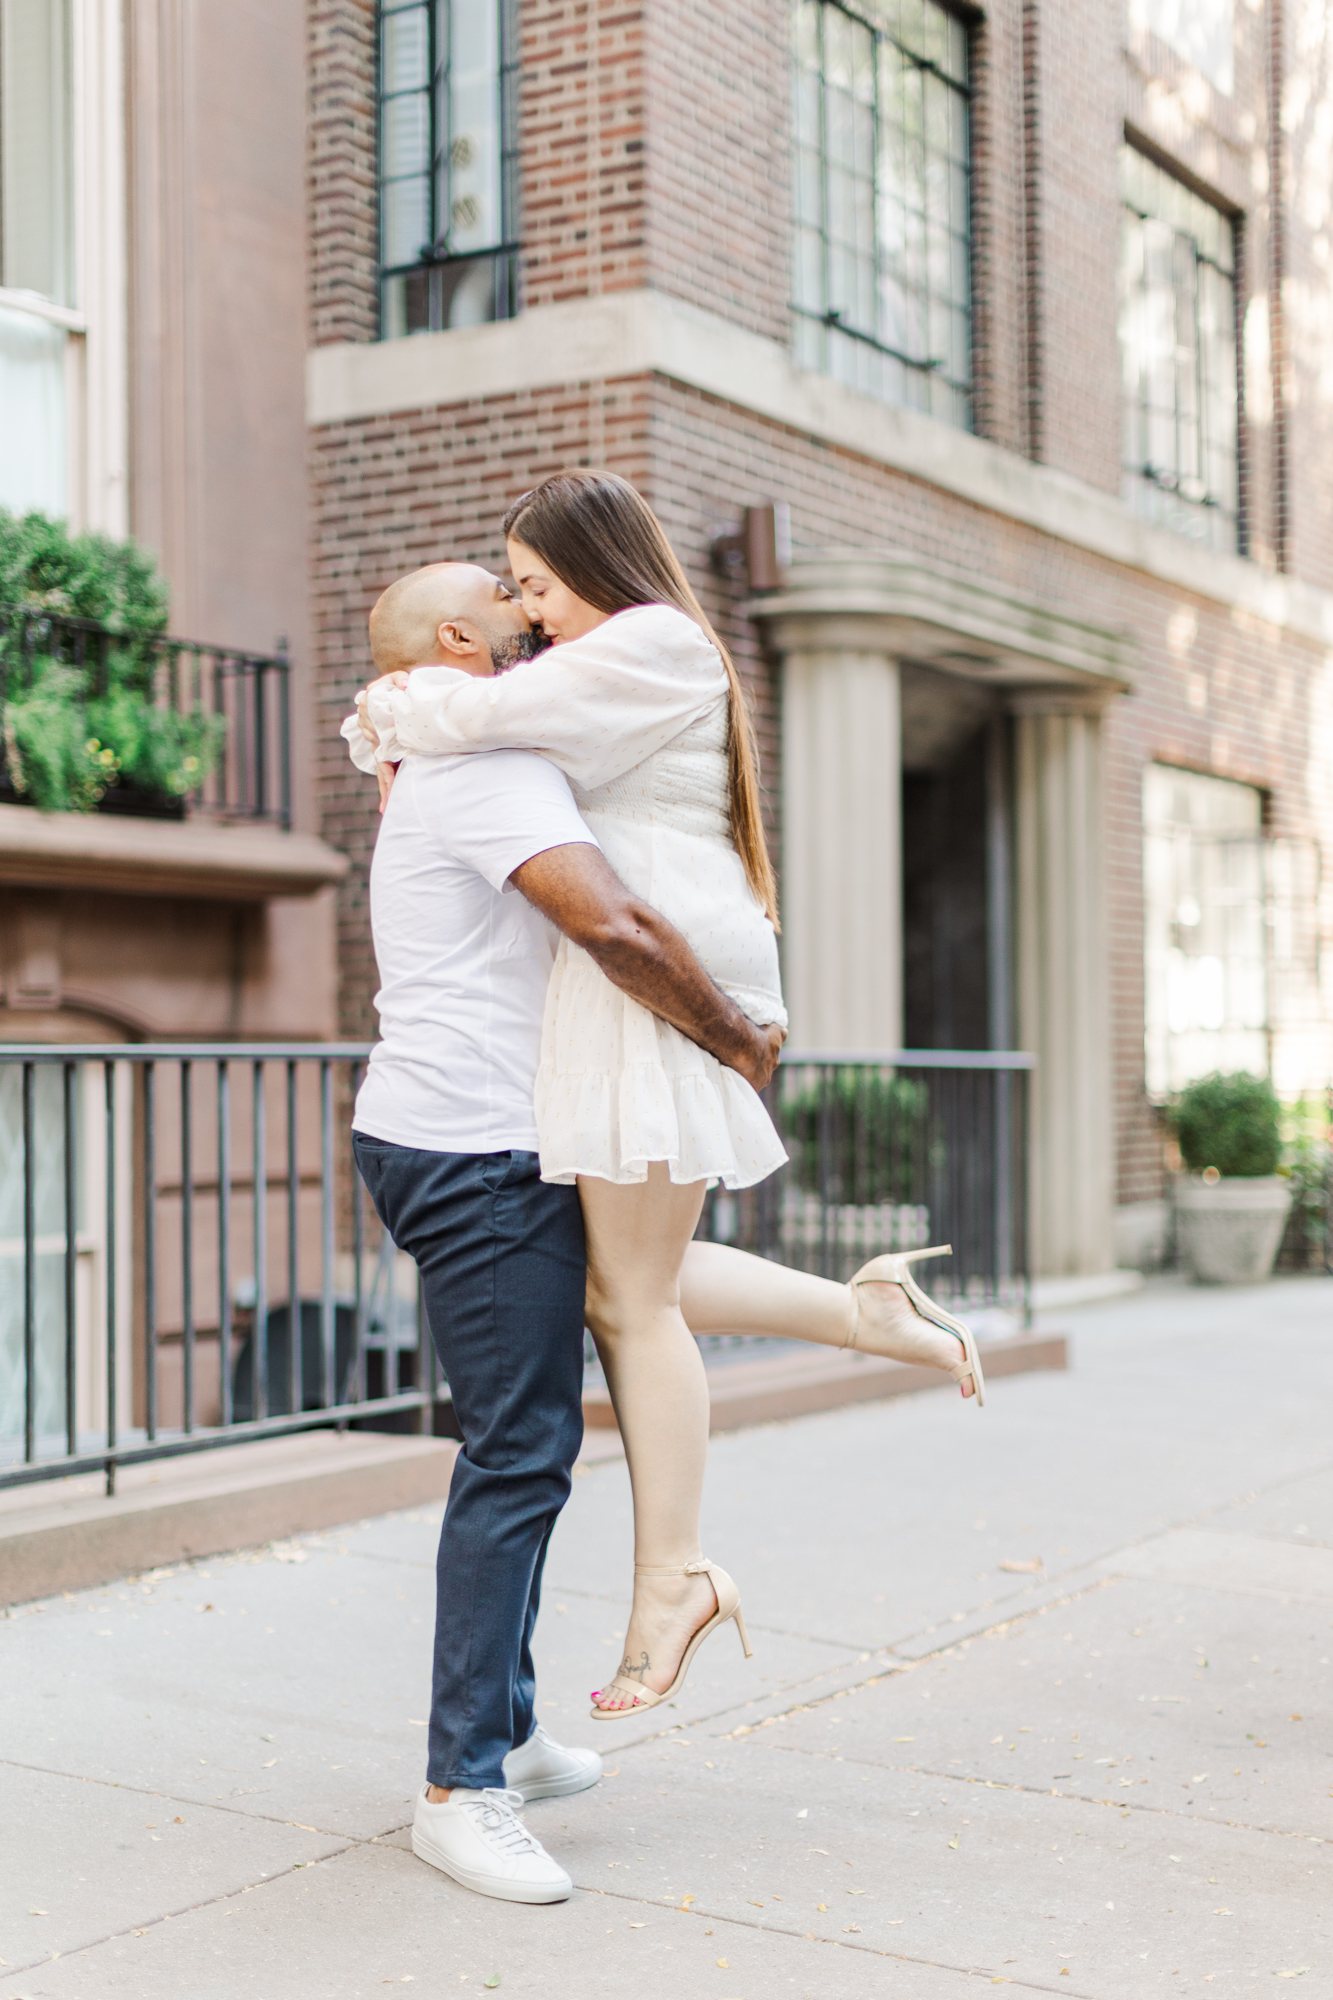 Intimate Brooklyn Heights Promenade Engagement Session